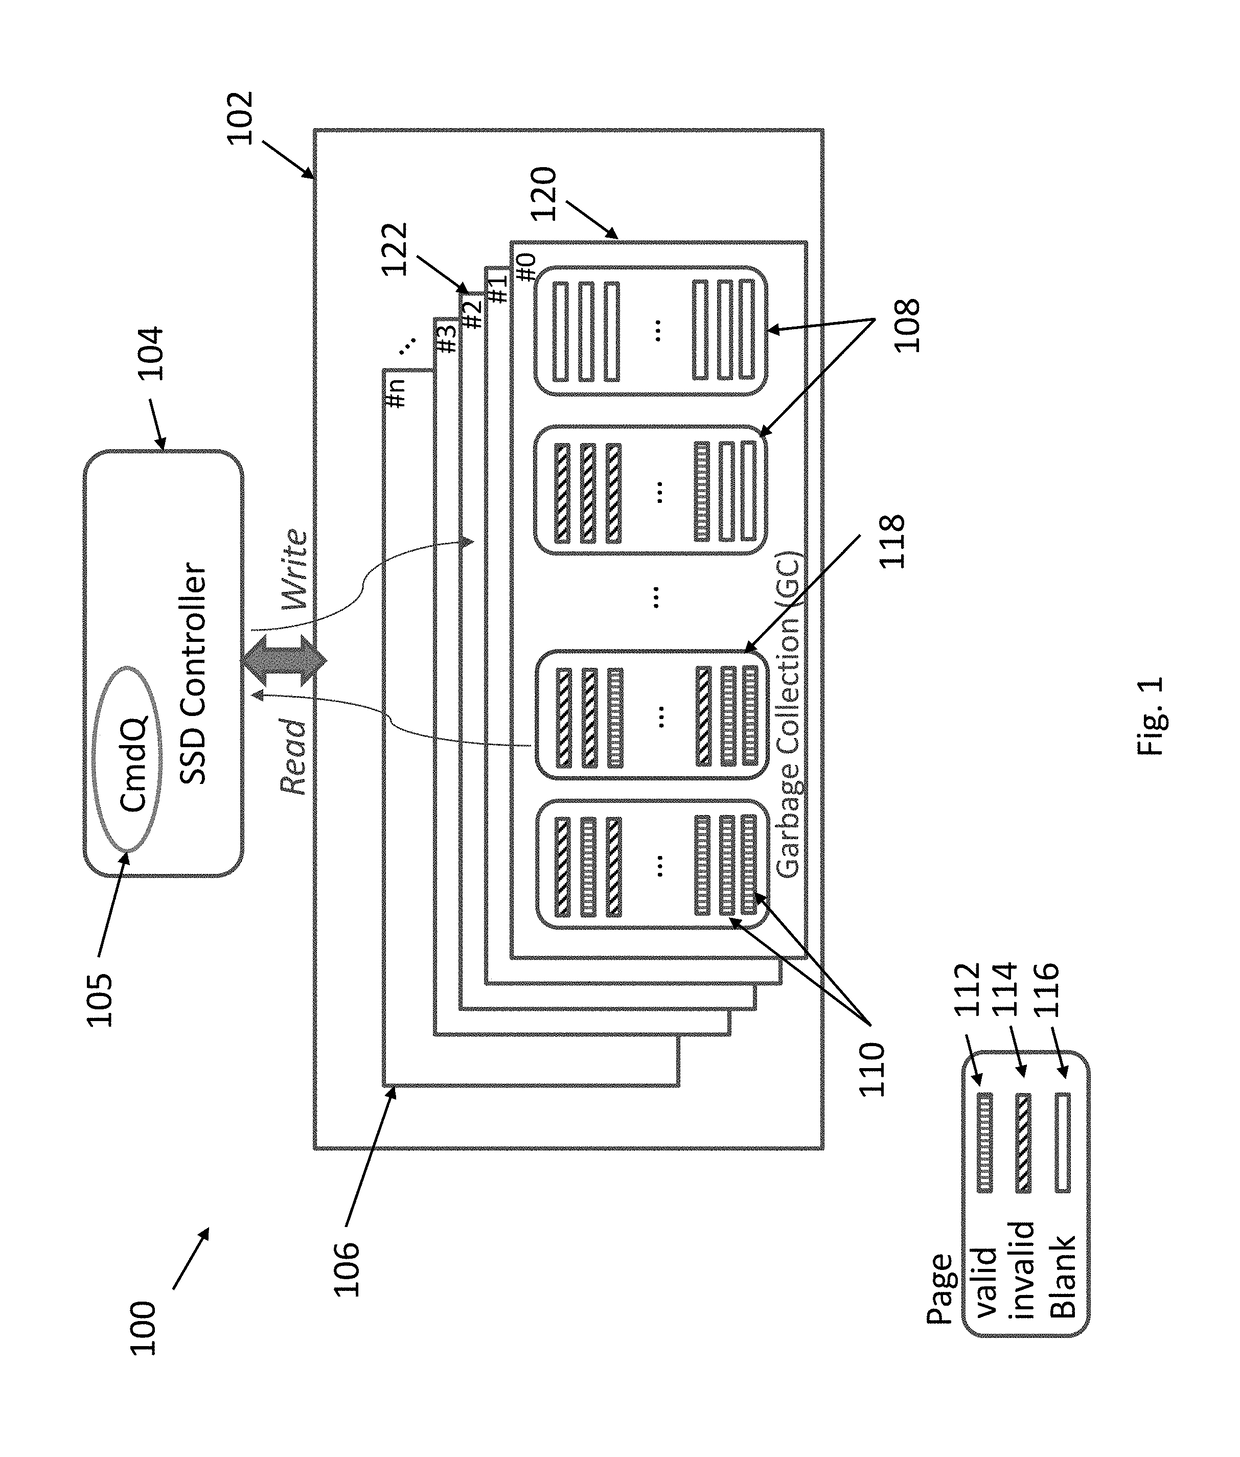 Systems and methods for suppressing latency in non-volatile solid state devices